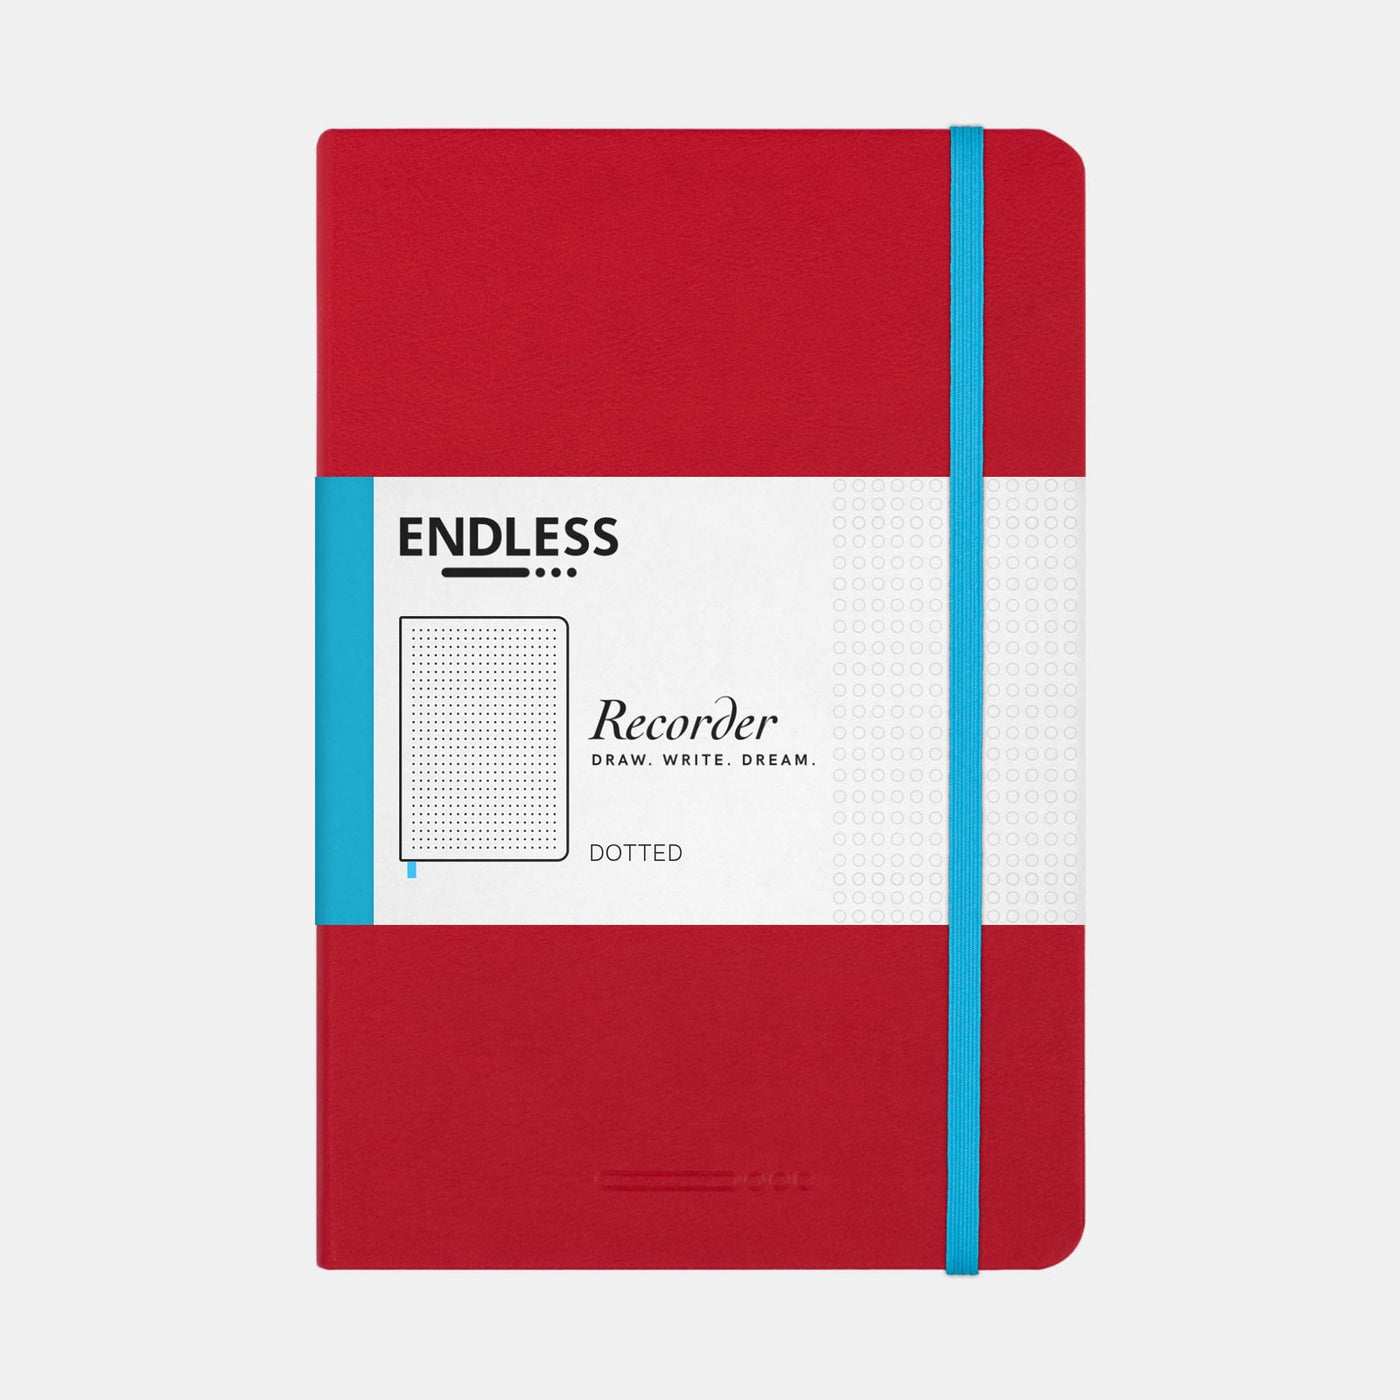 Endless paper This notebook loves ink.  With virtually zero bleed-through, the Recorder ensures your ideas stay only on the page you use.   check out our selection at Vanness